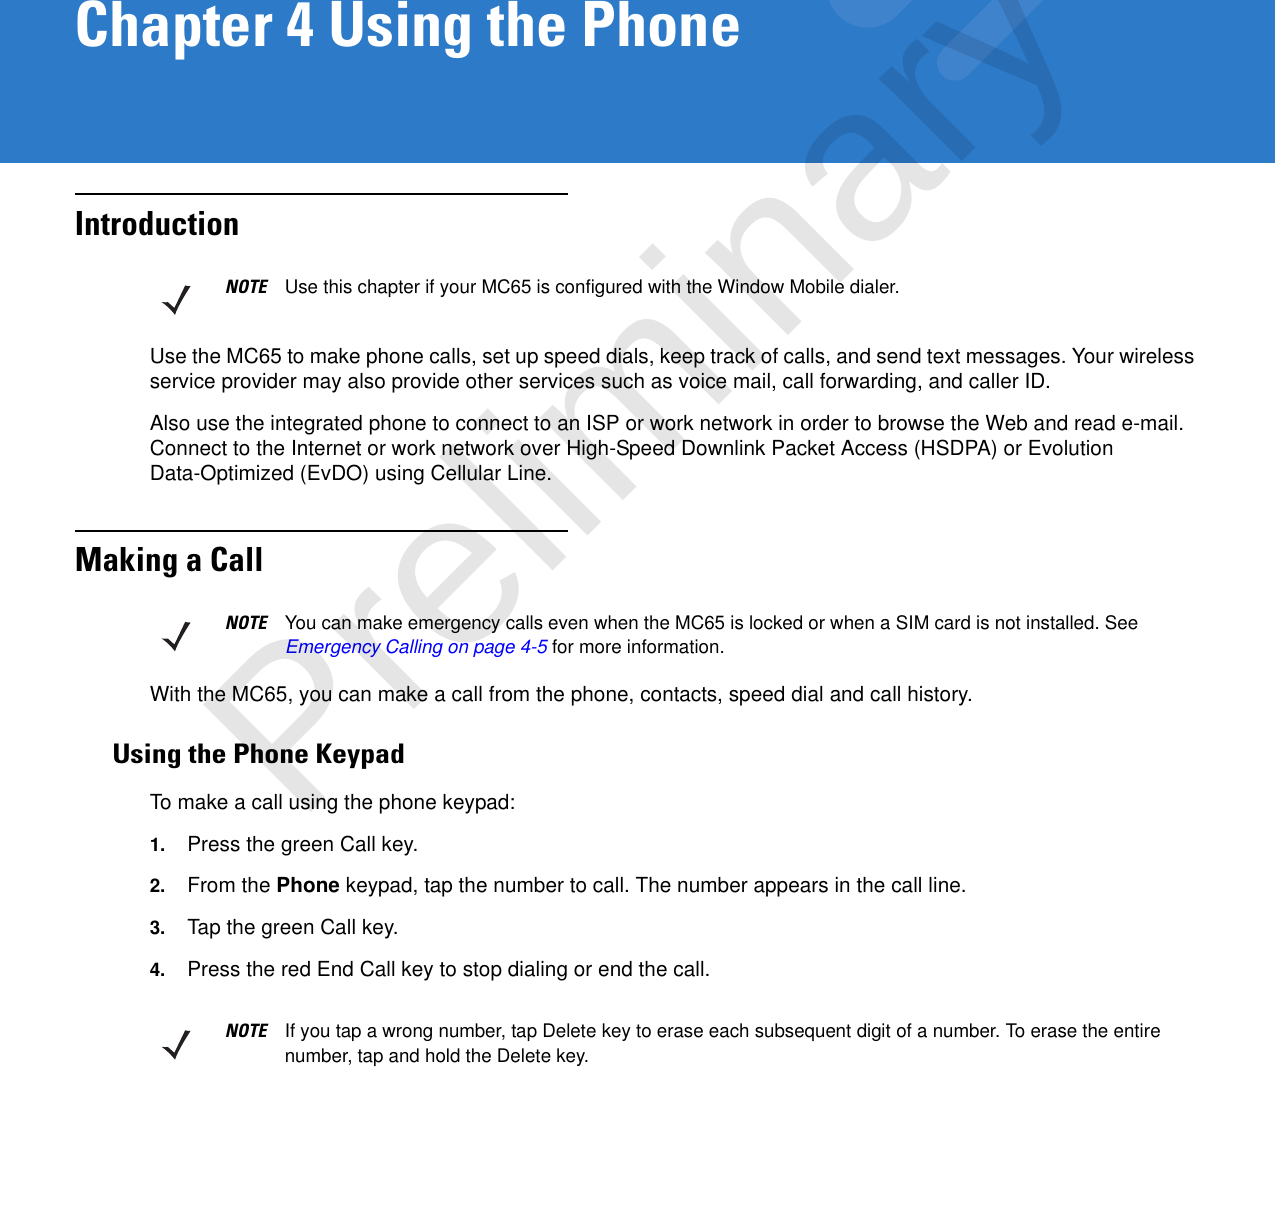 Chapter 4 Using the PhoneIntroductionUse the MC65 to make phone calls, set up speed dials, keep track of calls, and send text messages. Your wireless service provider may also provide other services such as voice mail, call forwarding, and caller ID.Also use the integrated phone to connect to an ISP or work network in order to browse the Web and read e-mail. Connect to the Internet or work network over High-Speed Downlink Packet Access (HSDPA) or Evolution Data-Optimized (EvDO) using Cellular Line.Making a CallWith the MC65, you can make a call from the phone, contacts, speed dial and call history.Using the Phone KeypadTo make a call using the phone keypad:1. Press the green Call key.2. From the Phone keypad, tap the number to call. The number appears in the call line.3. Tap the green Call key.4. Press the red End Call key to stop dialing or end the call.NOTE Use this chapter if your MC65 is configured with the Window Mobile dialer.NOTE You can make emergency calls even when the MC65 is locked or when a SIM card is not installed. See Emergency Calling on page 4-5 for more information.NOTE If you tap a wrong number, tap Delete key to erase each subsequent digit of a number. To erase the entire number, tap and hold the Delete key.Preliminary